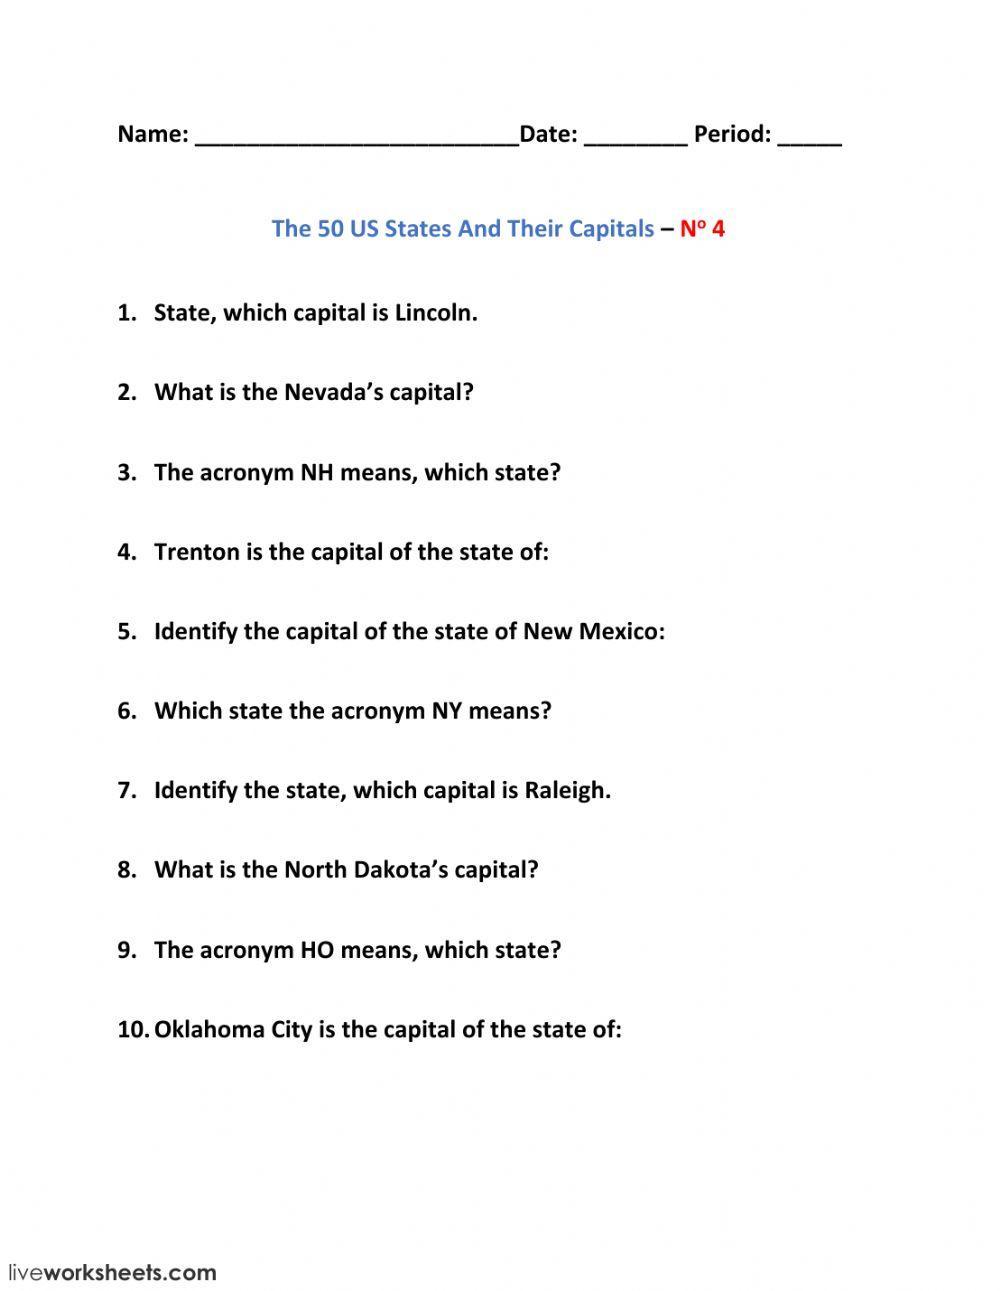 The 50 US States And Their Capitals – No 4